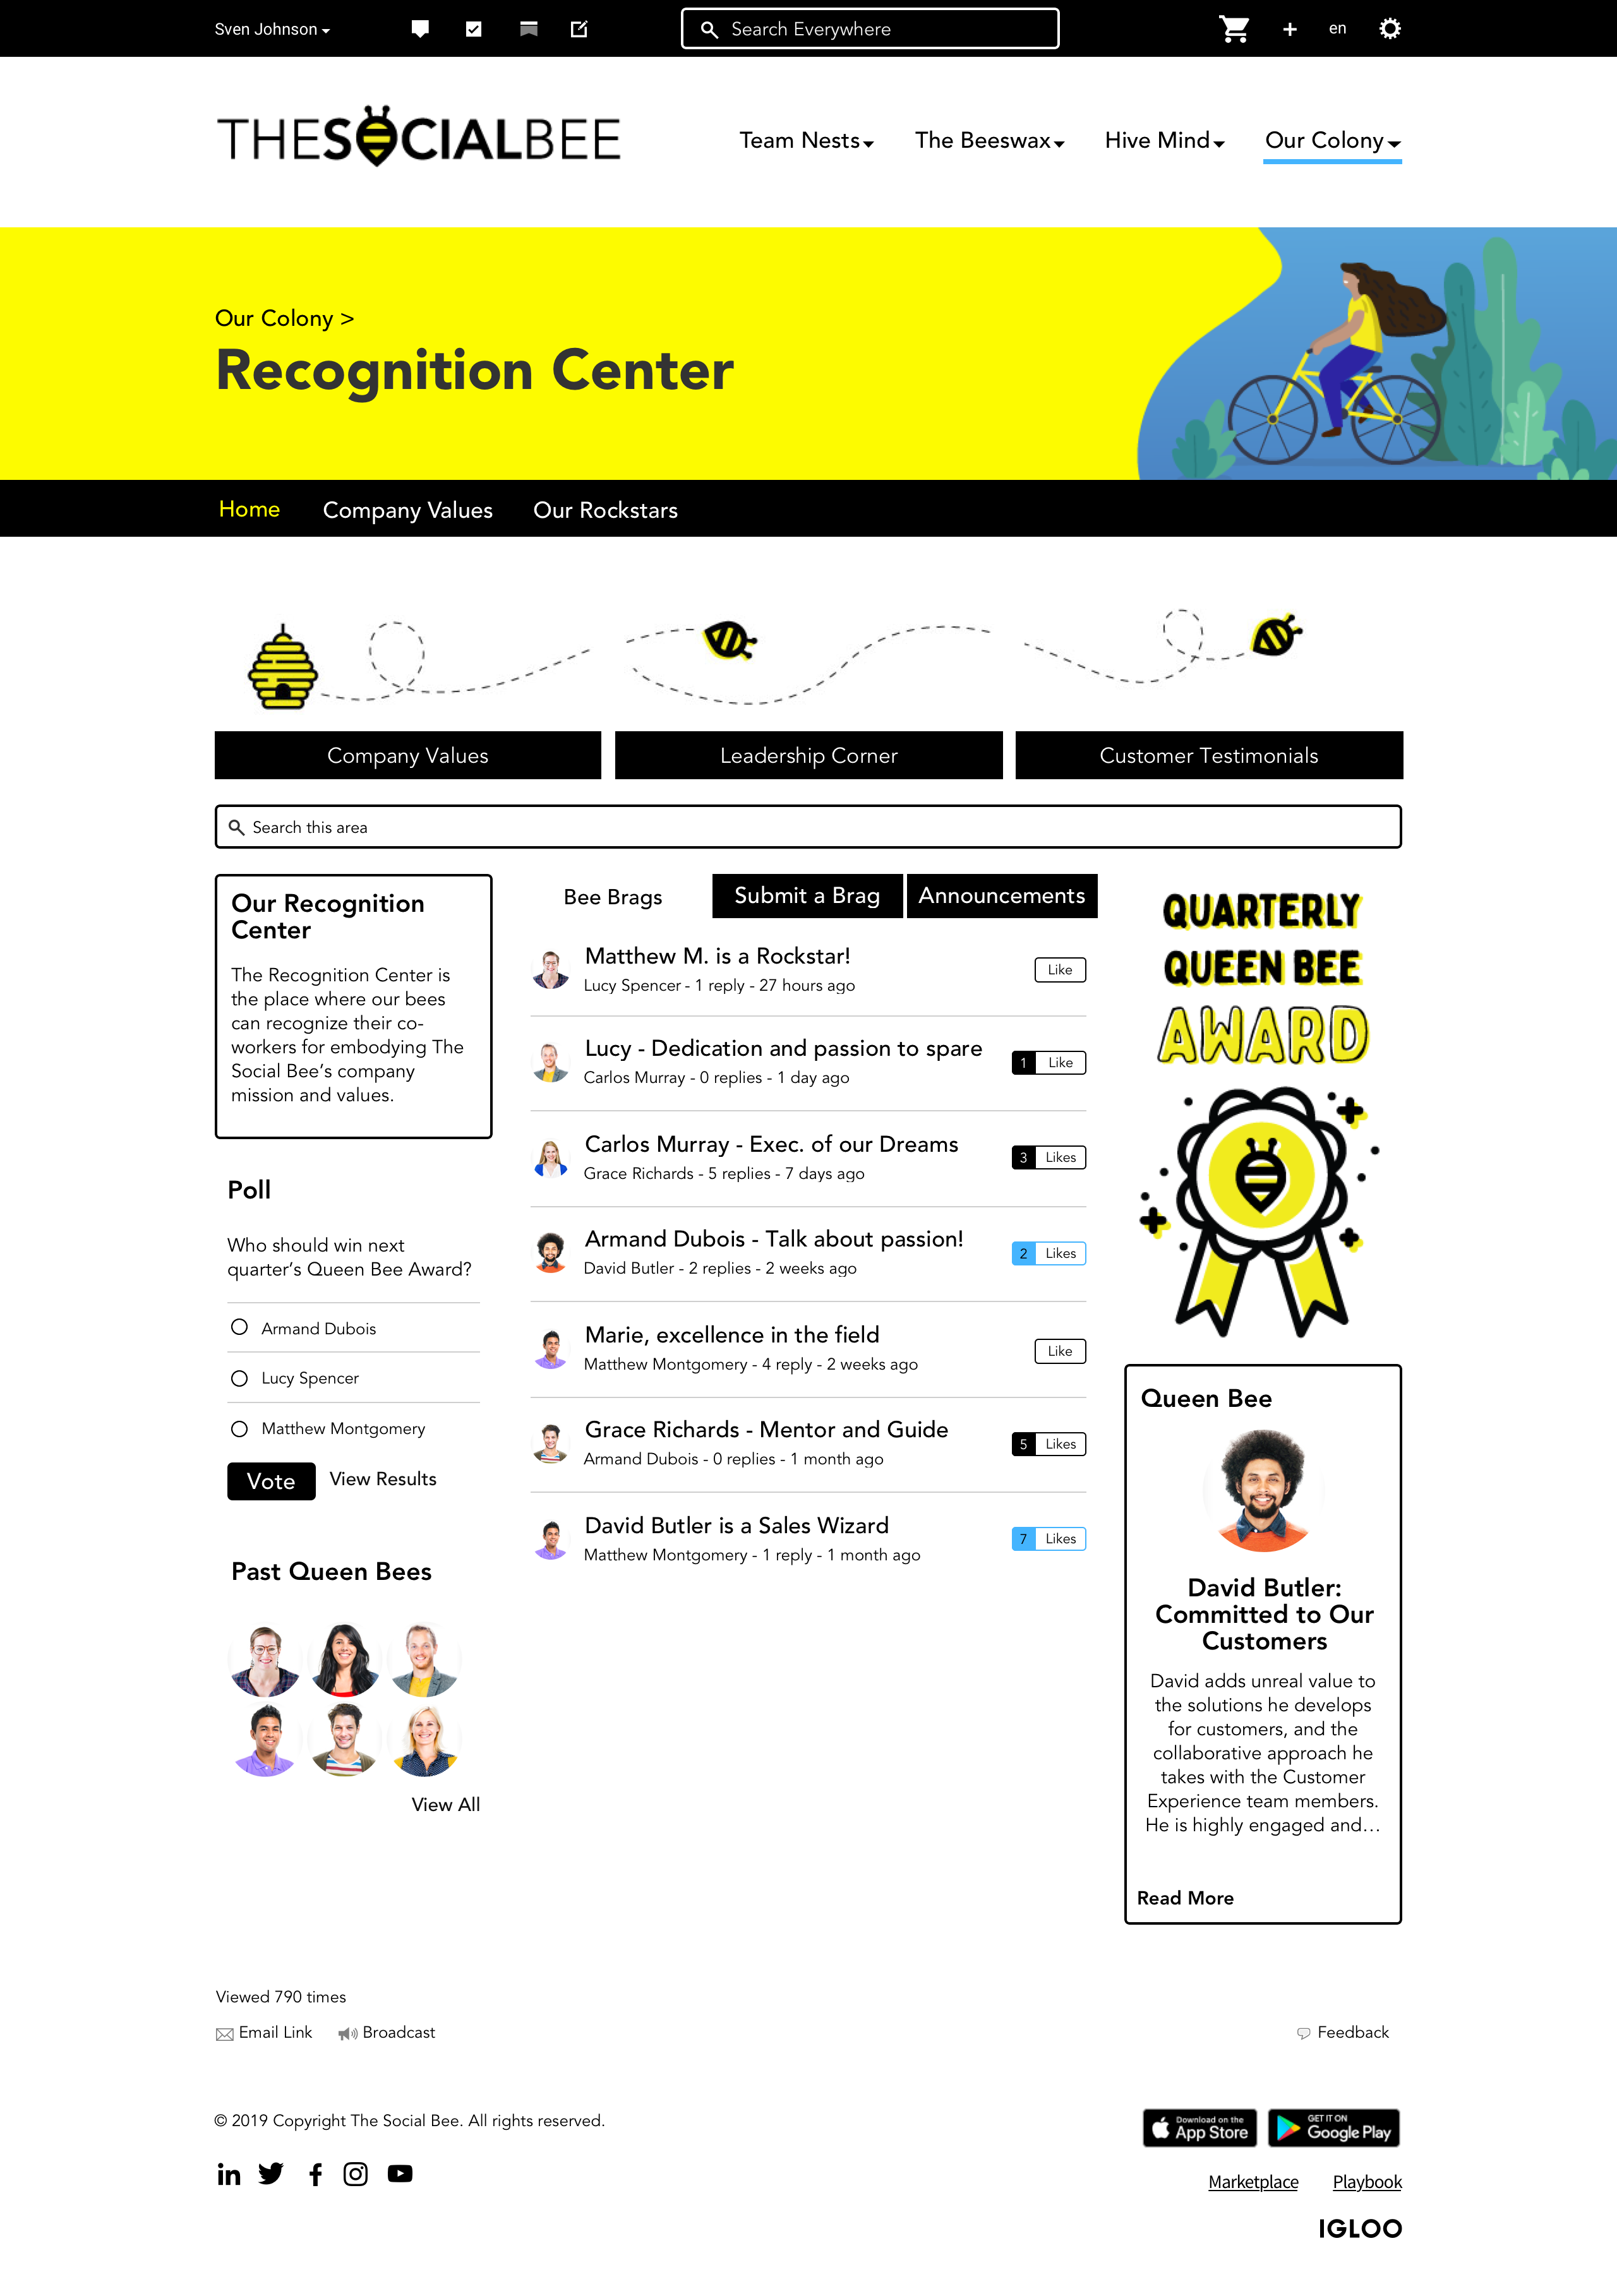 Recognition Center Home